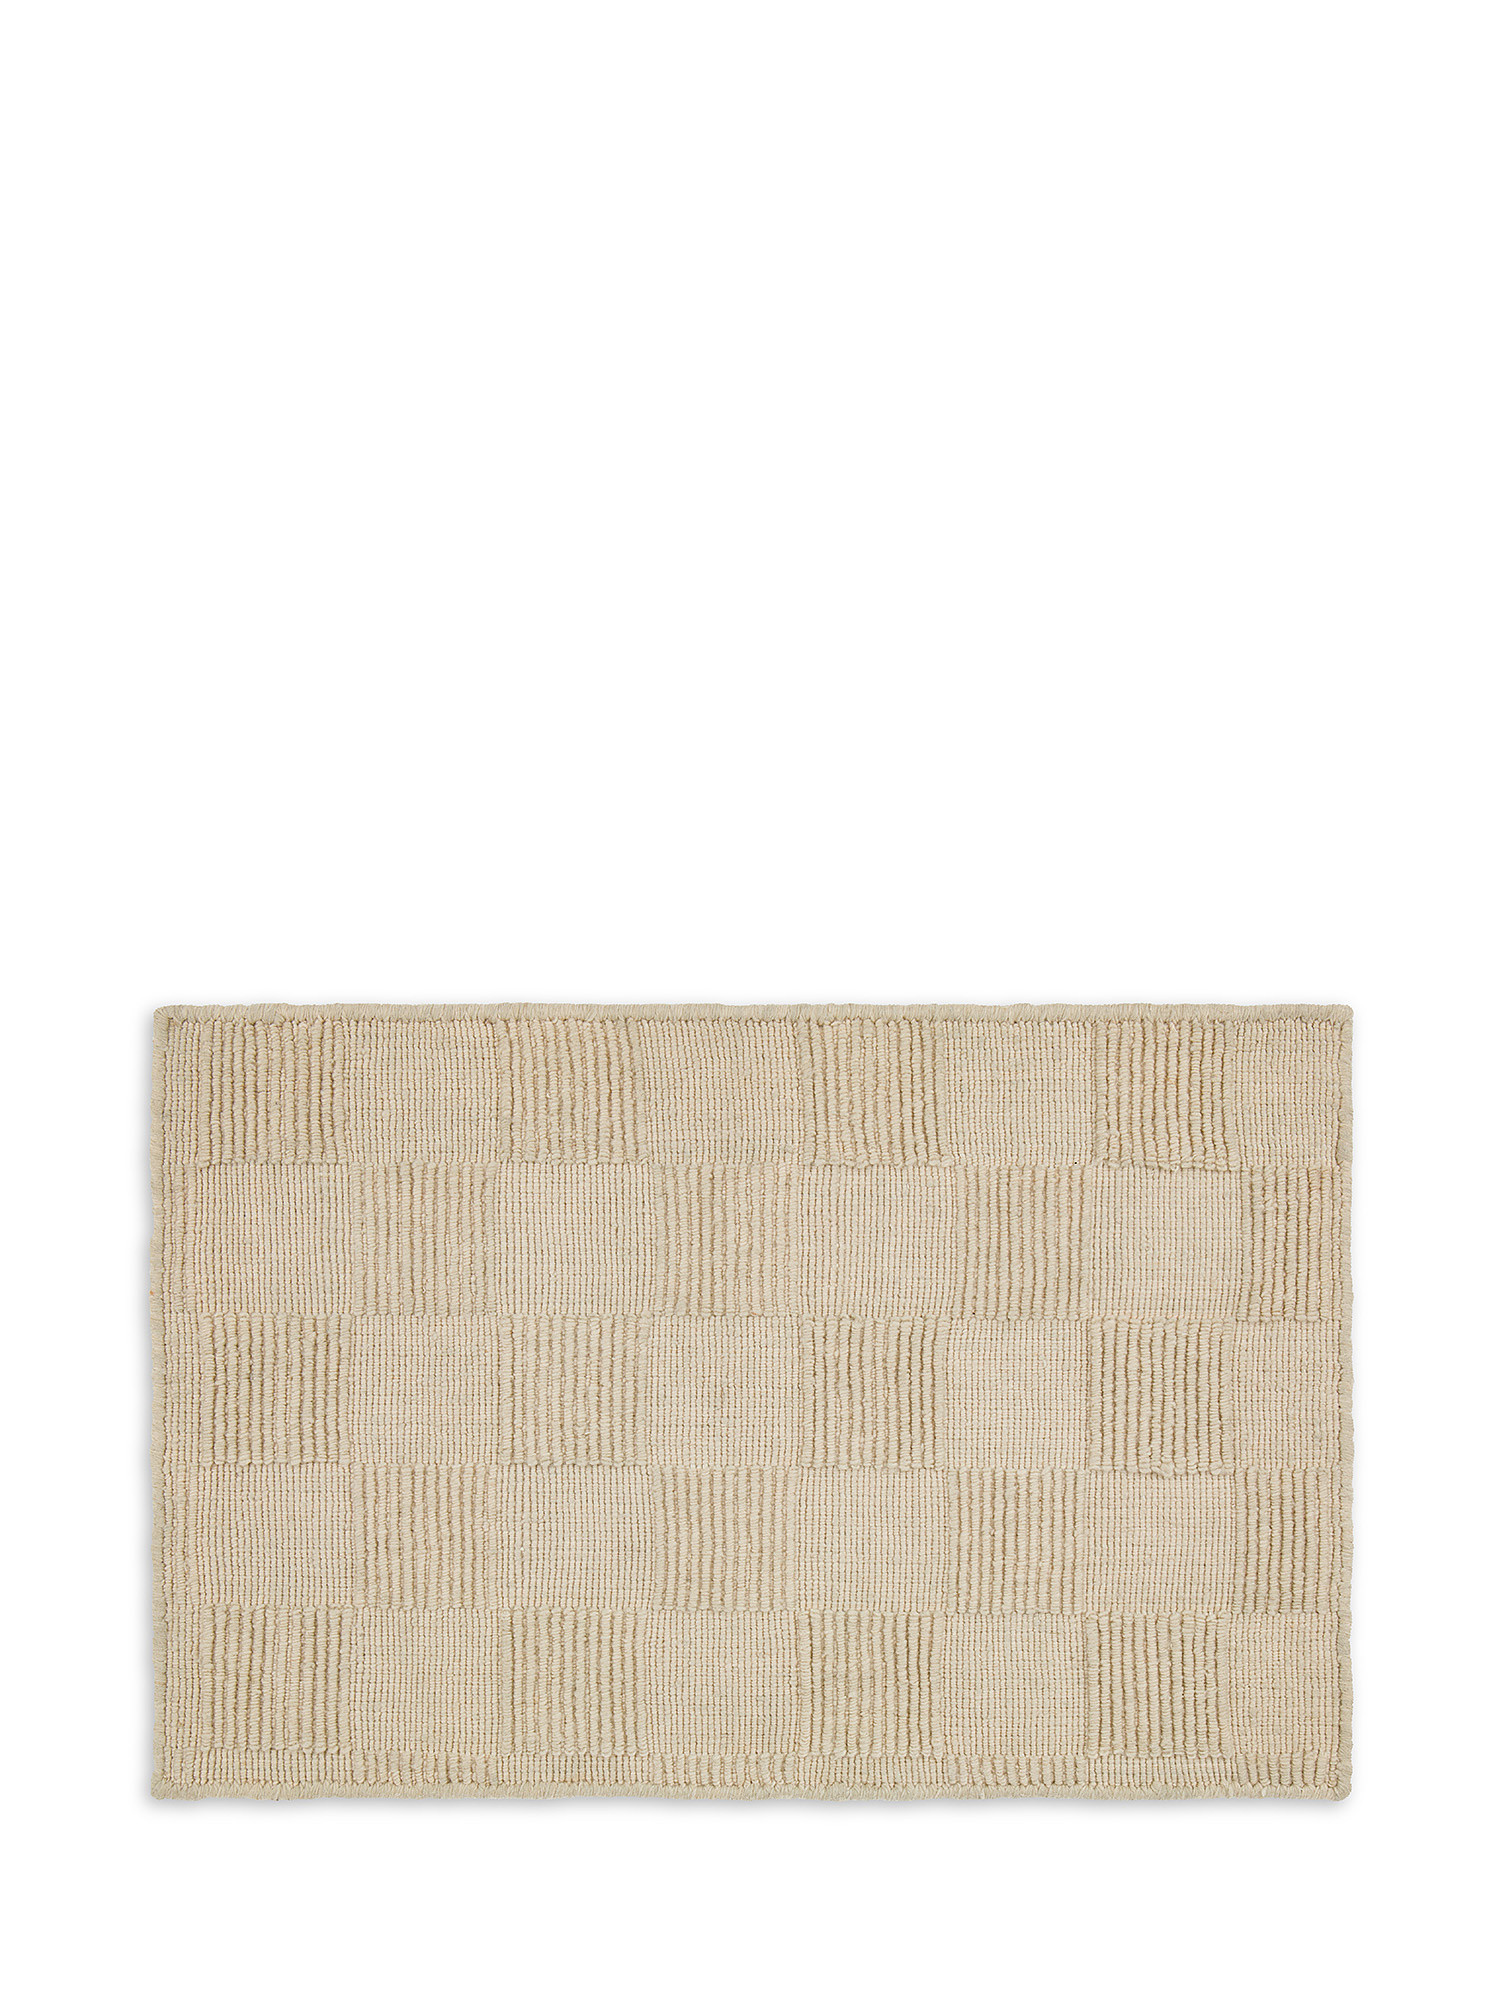 120x180 cm carpet with geometric pattern., White Ivory, large image number 0